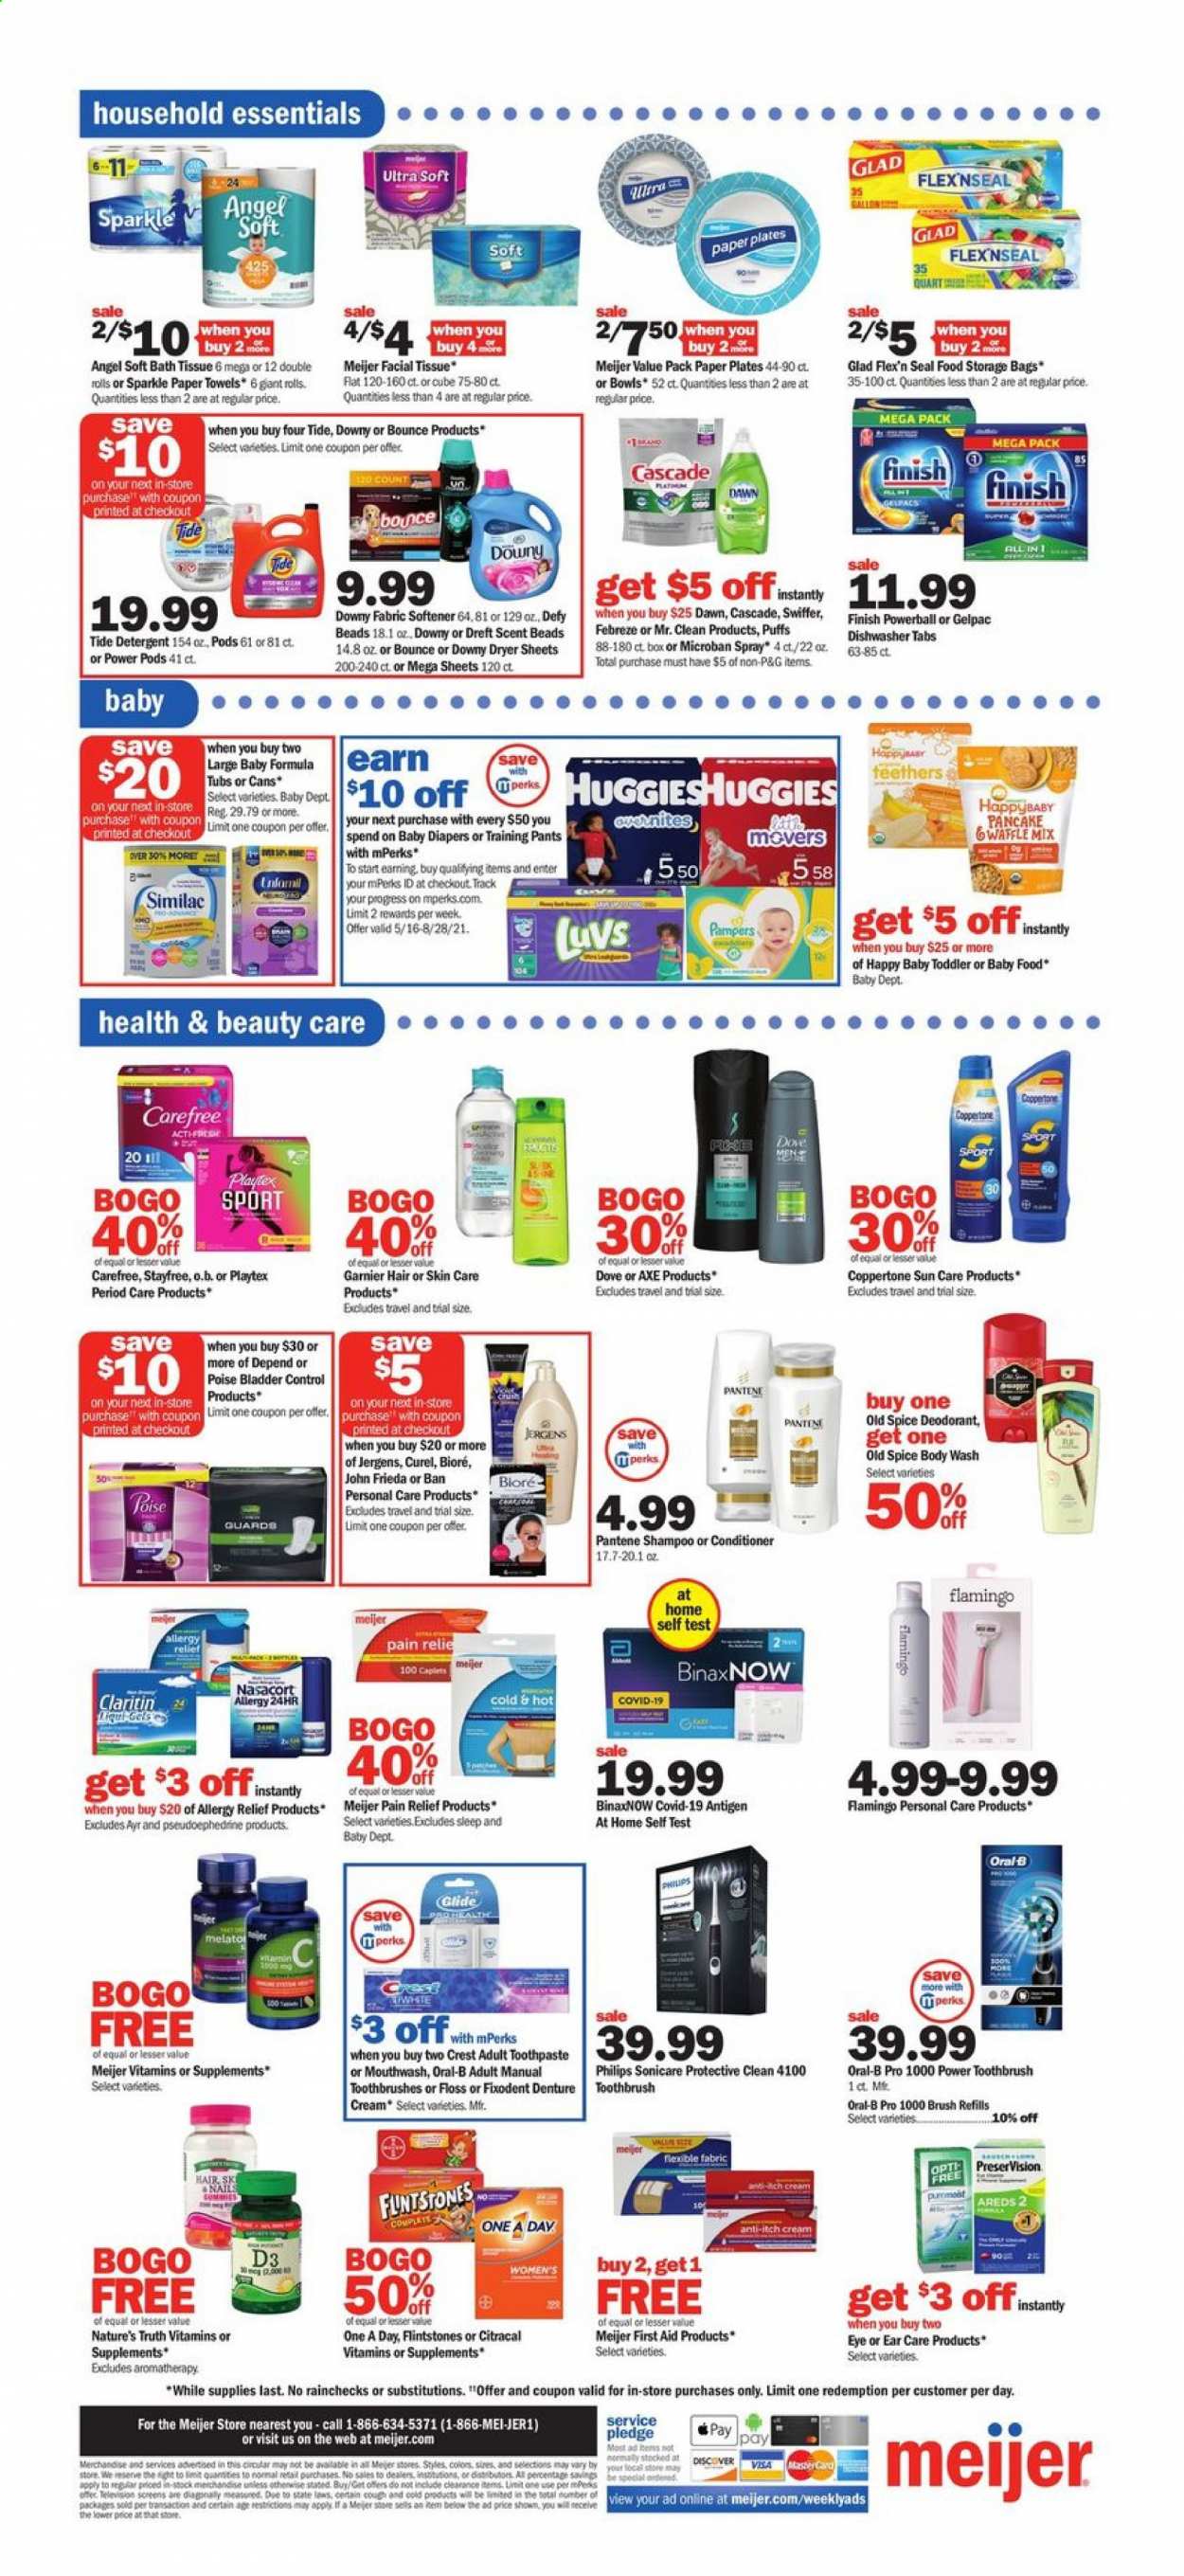 thumbnail - Meijer Flyer - 06/13/2021 - 06/19/2021 - Sales products - puffs, pancakes, salt, spice, Similac, Pampers, pants, nappies, baby pants, bath tissue, kitchen towels, paper towels, detergent, Febreze, Pledge, Swiffer, Cascade, Tide, fabric softener, dryer sheets, Downy Laundry, Finish Powerball, body wash, Dove, shampoo, Old Spice, toothbrush, Oral-B, toothpaste, mouthwash, denture cream, Fixodent, Crest, Stayfree, Playtex, Carefree, Garnier, Curél, Bioré®, conditioner, Pantene, John Frieda, Jergens, anti-perspirant, deodorant, storage bag, plate, Philips, bag, Nature's Truth, pain relief, vitamin D3, allergy relief. Page 14.